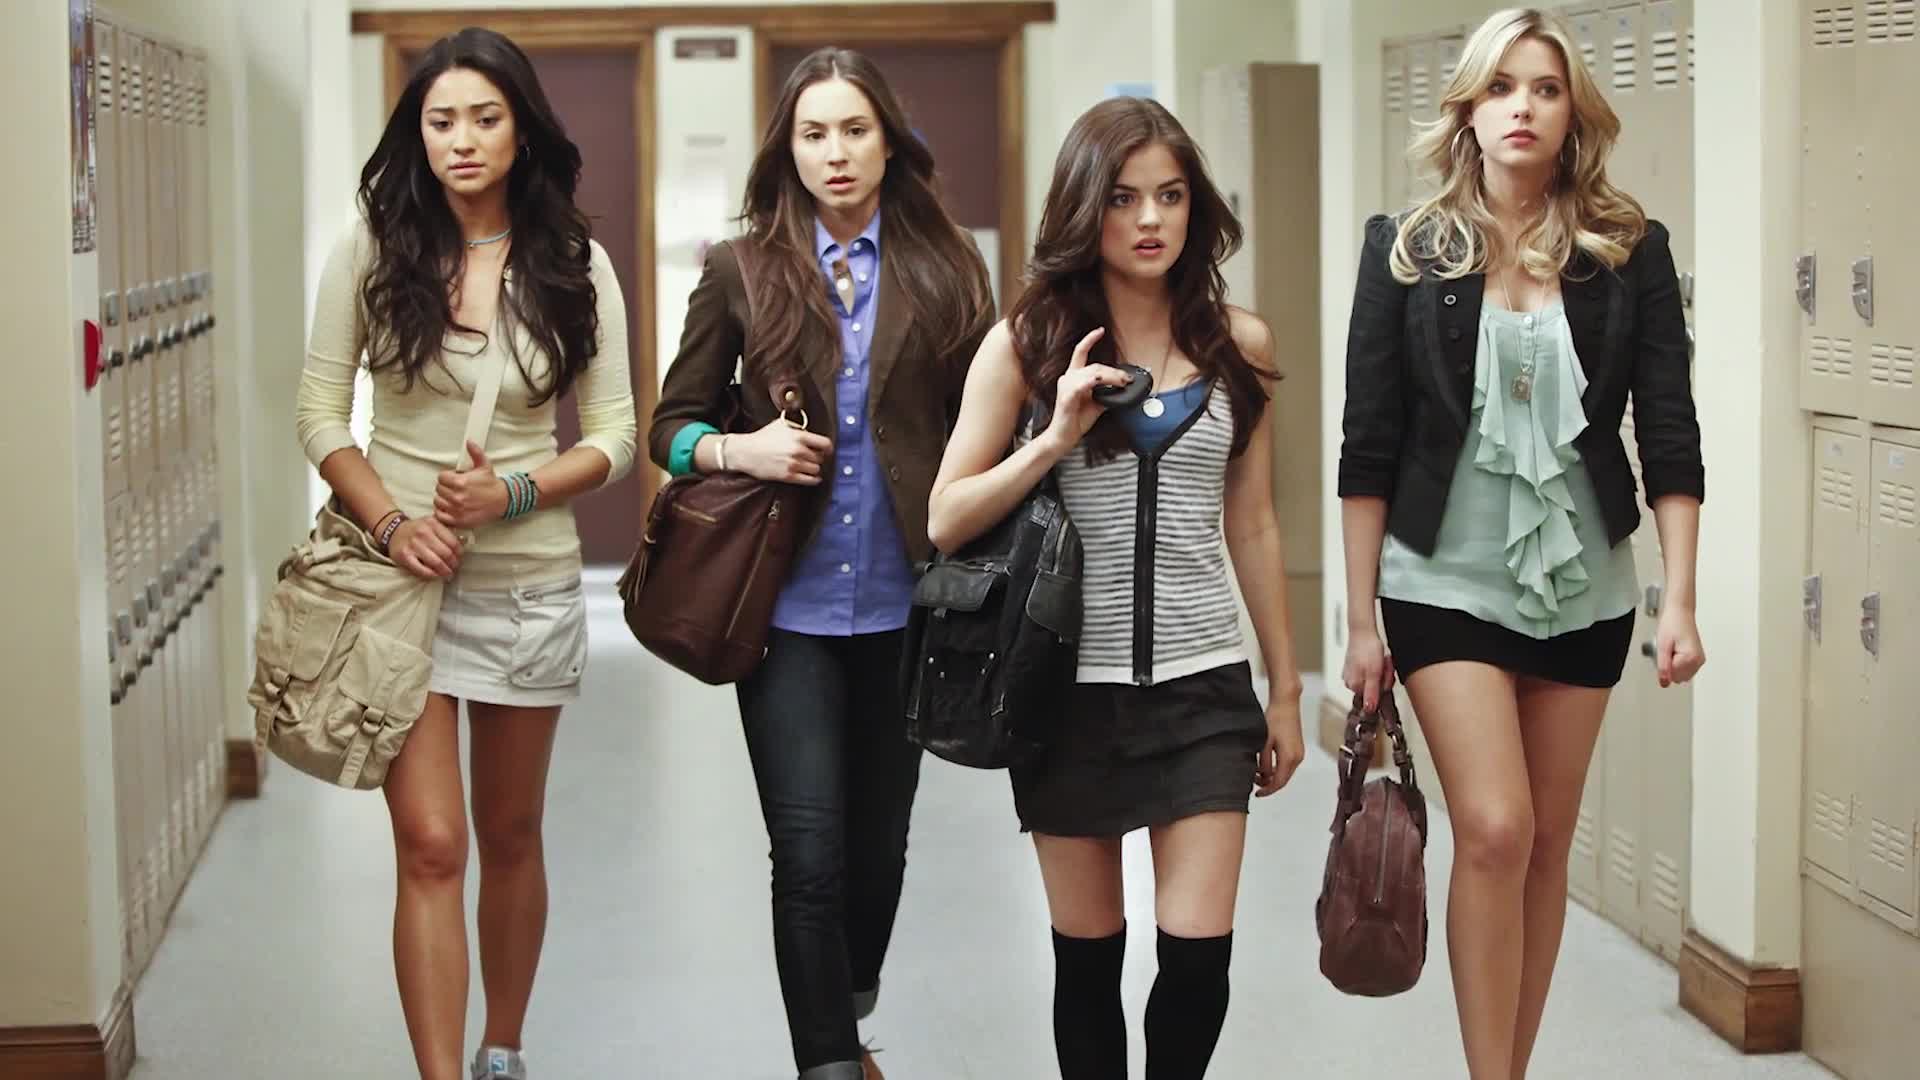 Watch How To Dress Like The Pretty Little Liars According To Their